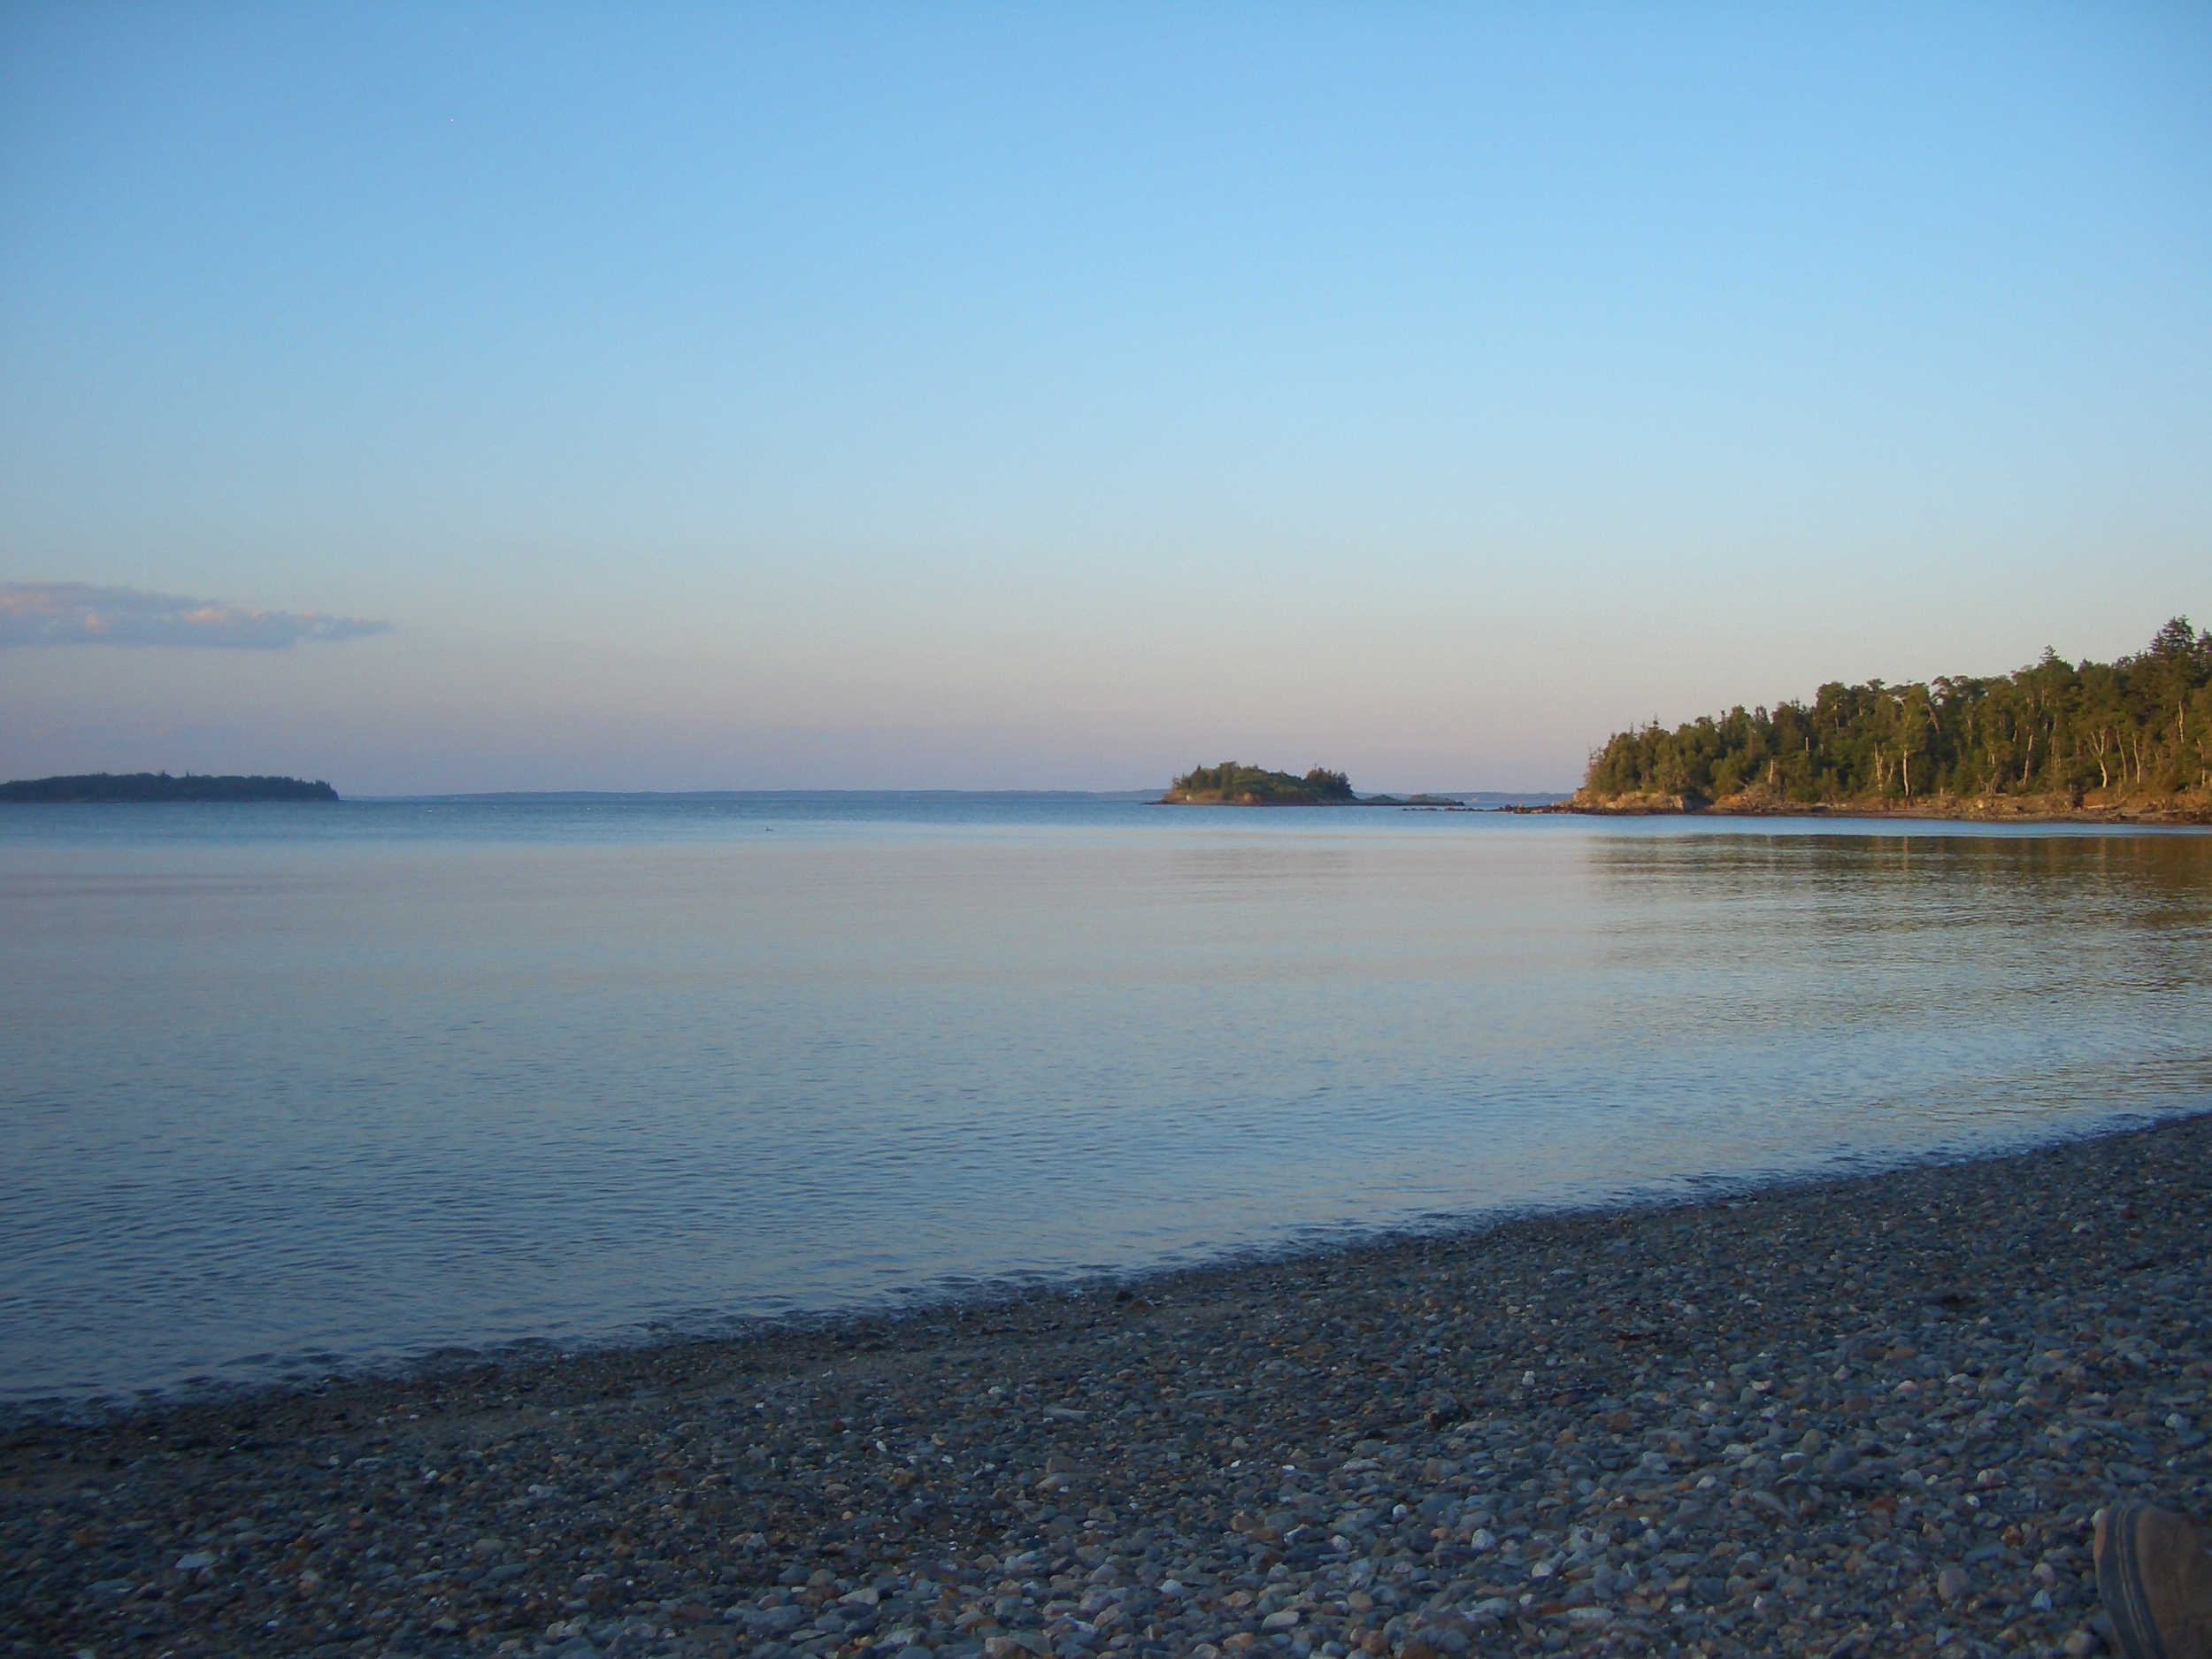 Bring your kayak and explore Penobscot Bay. There is nothing like paddling into the many small coves or sliding up onto a deserted beach on one of the many surrounding, uninhabited islands.